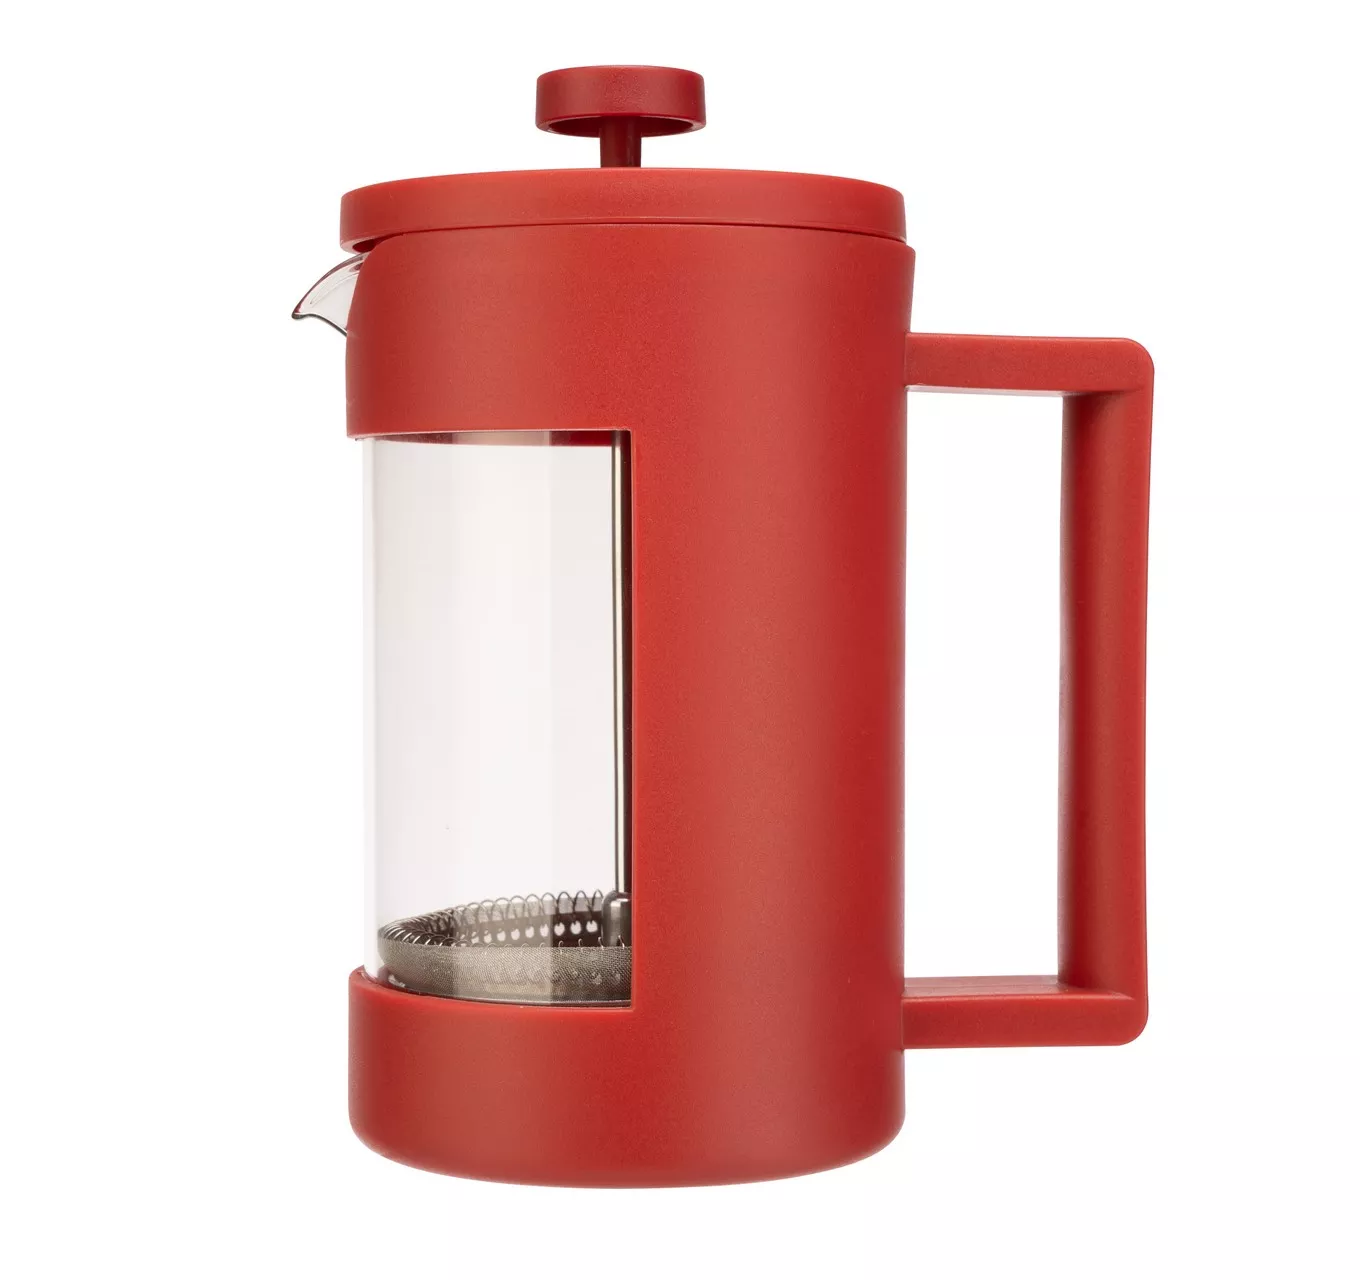 Cafetiere 6 Cup - Red